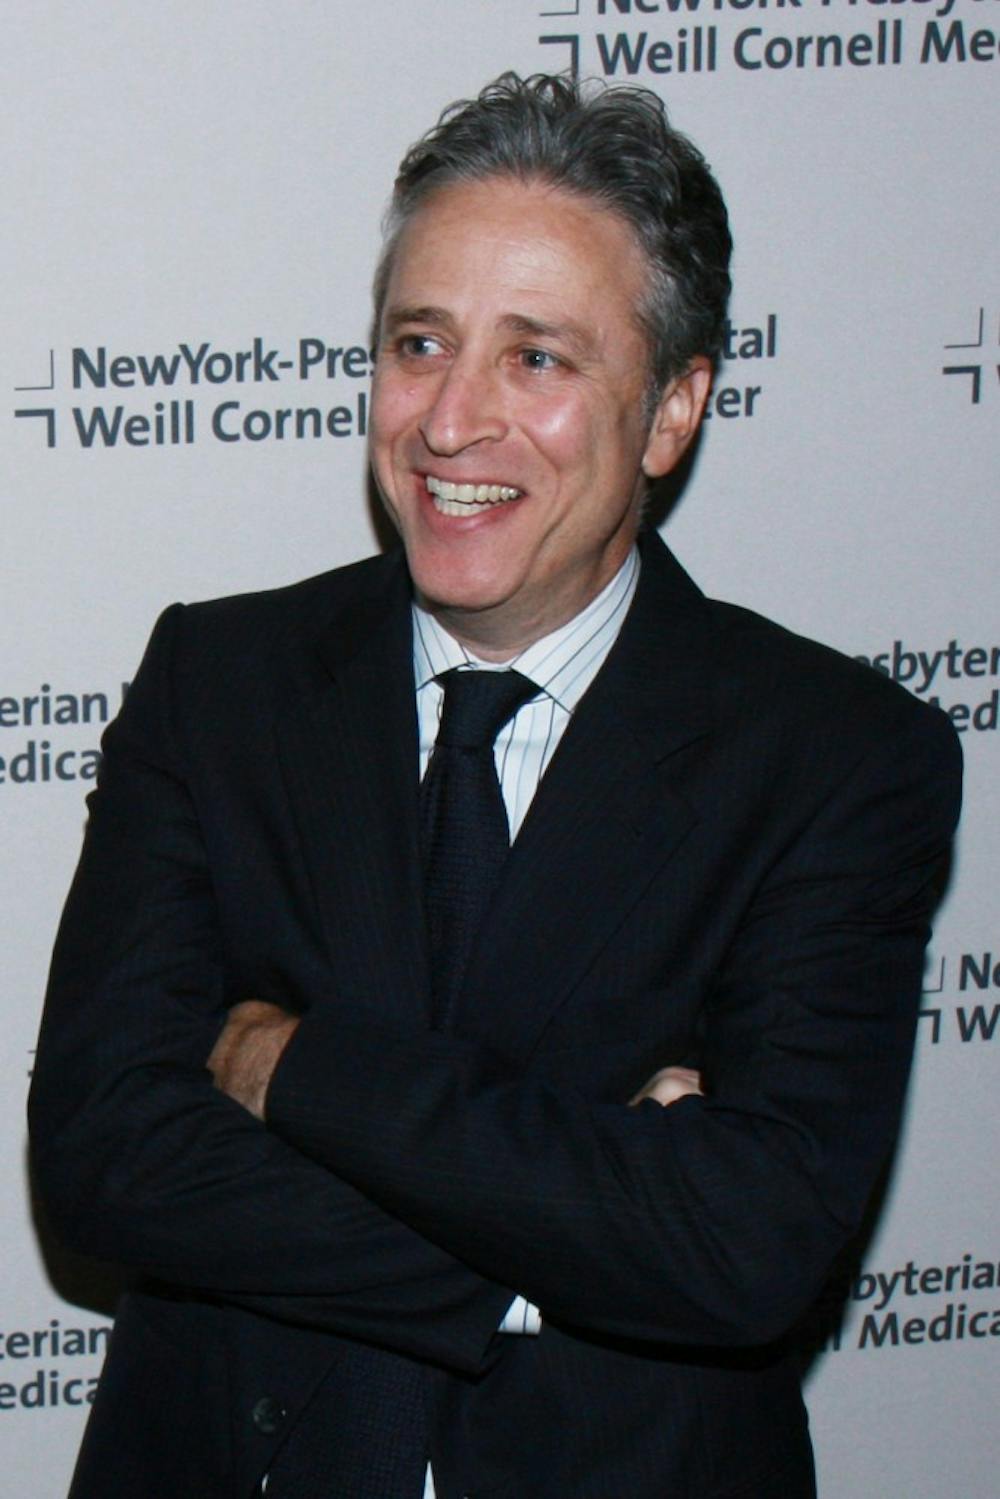 Jon Stewart announces he will be leaving “The Daily Show”